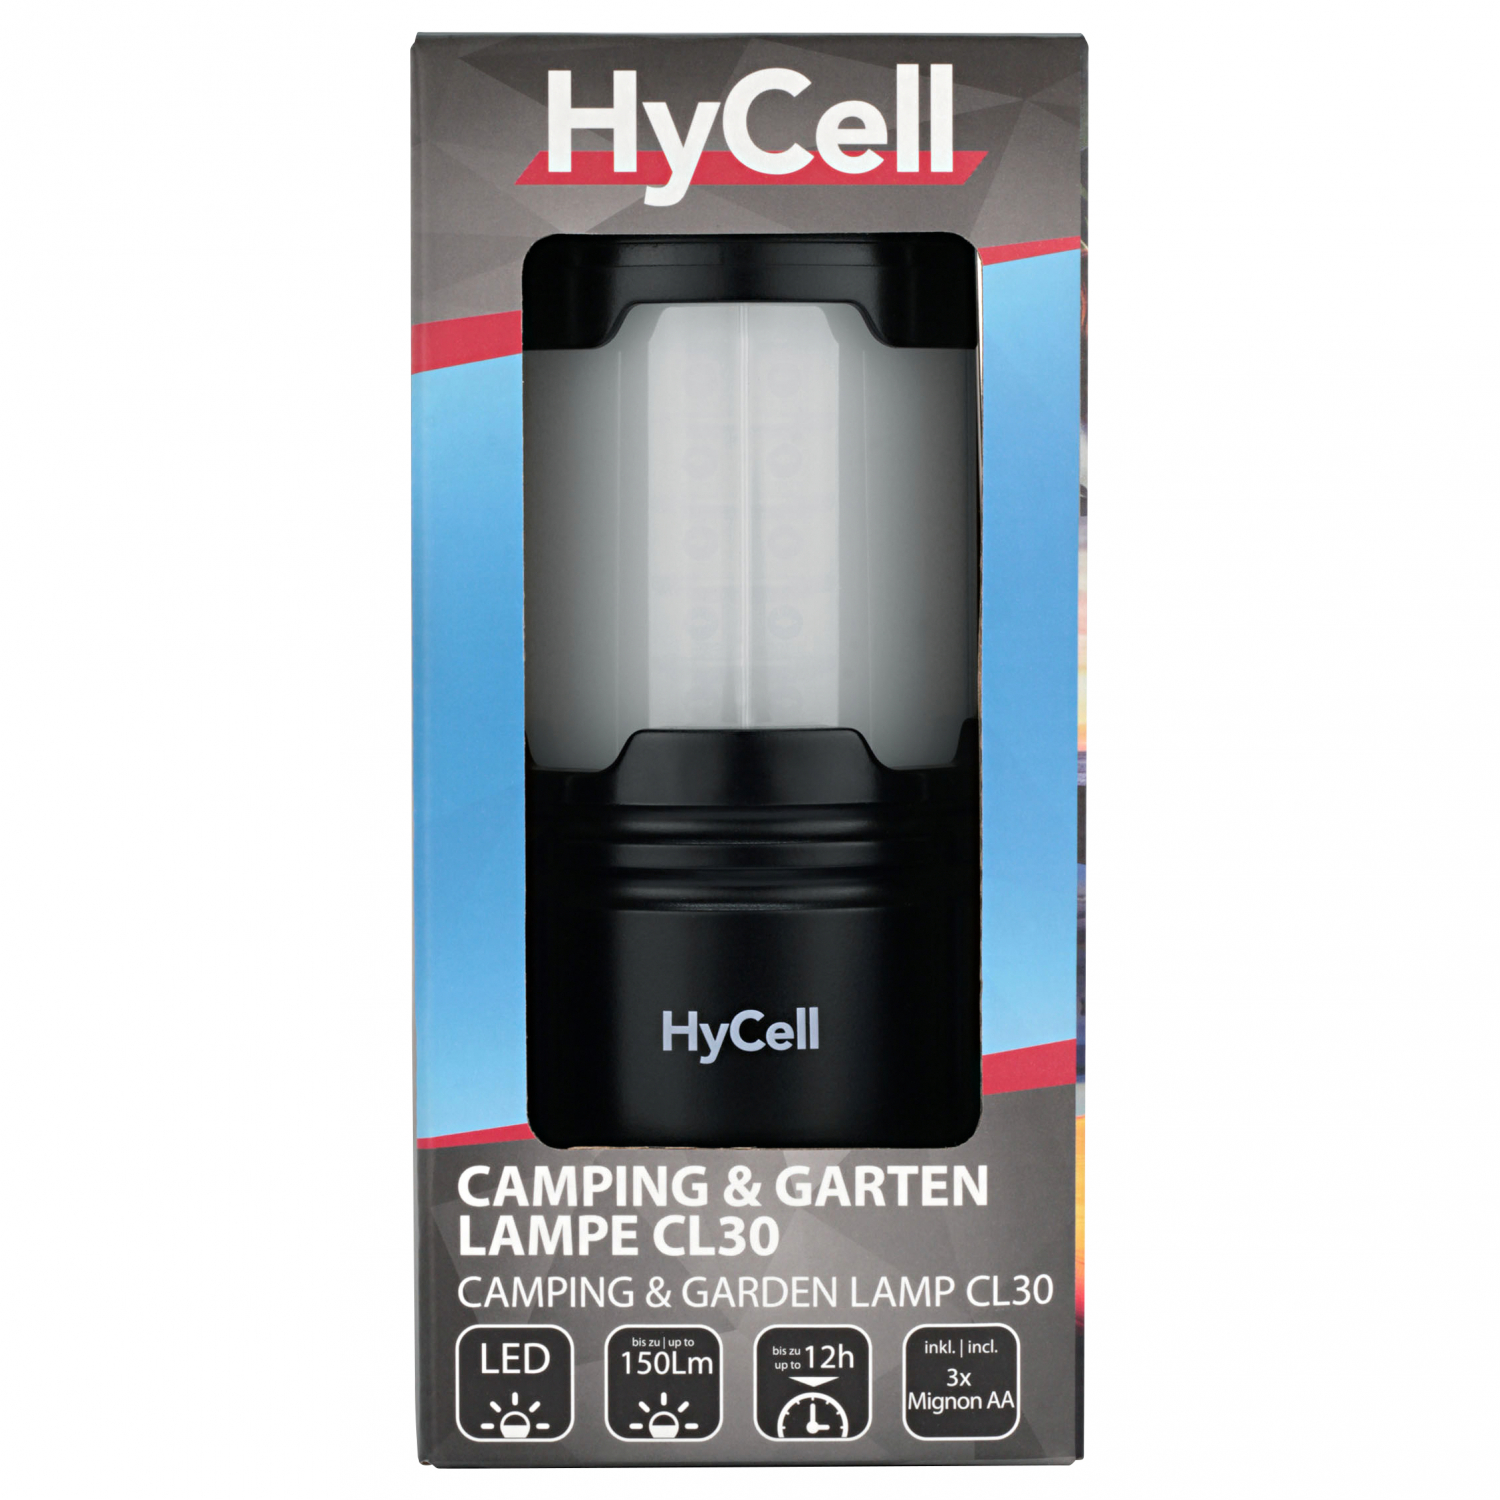 HyCell LED Camping and Garden Lamp CL30 